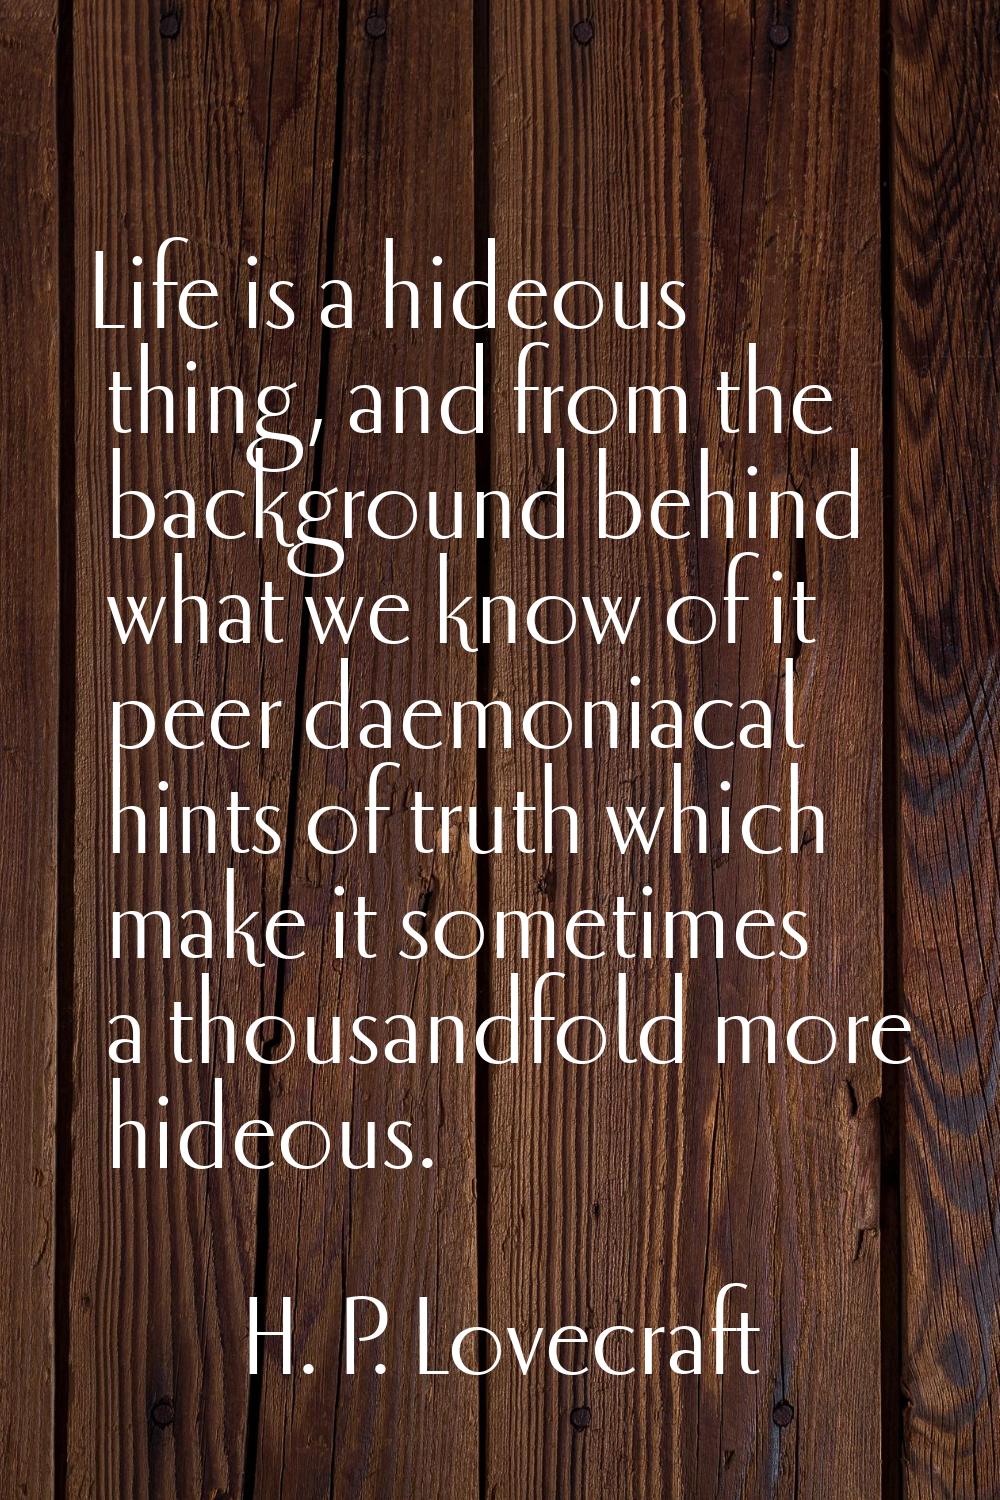 Life is a hideous thing, and from the background behind what we know of it peer daemoniacal hints o